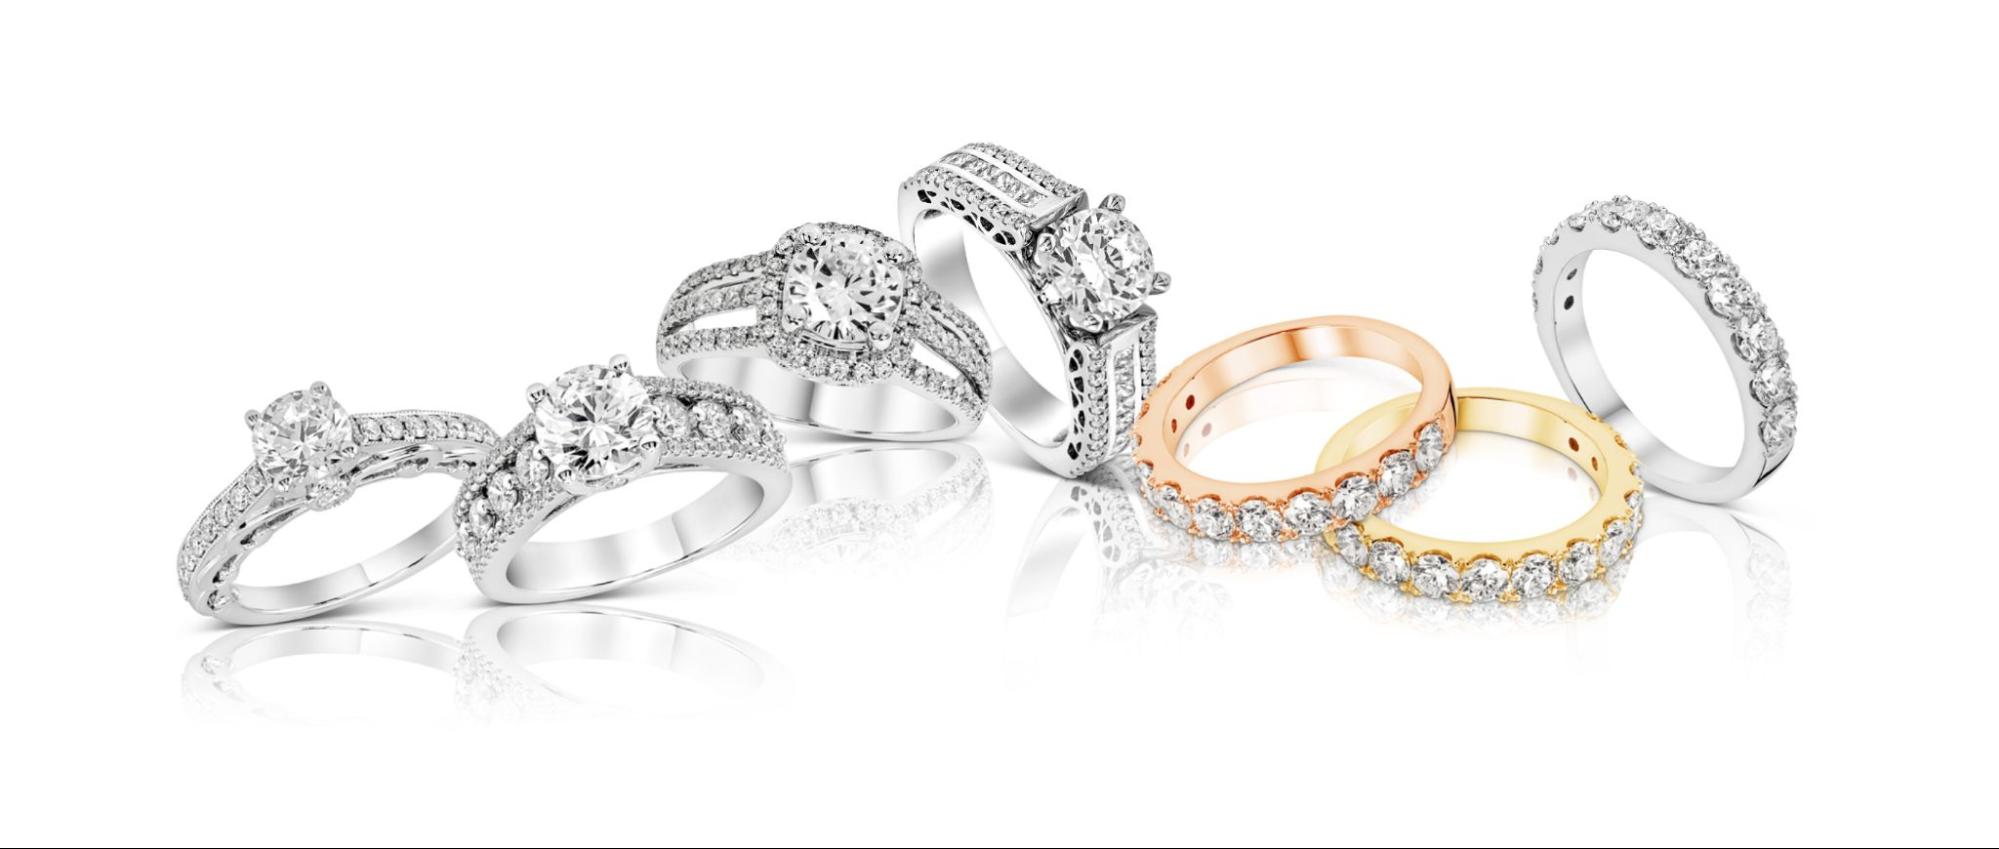 De beers  Jewelry photography, Jewelry product shots, Jewelry